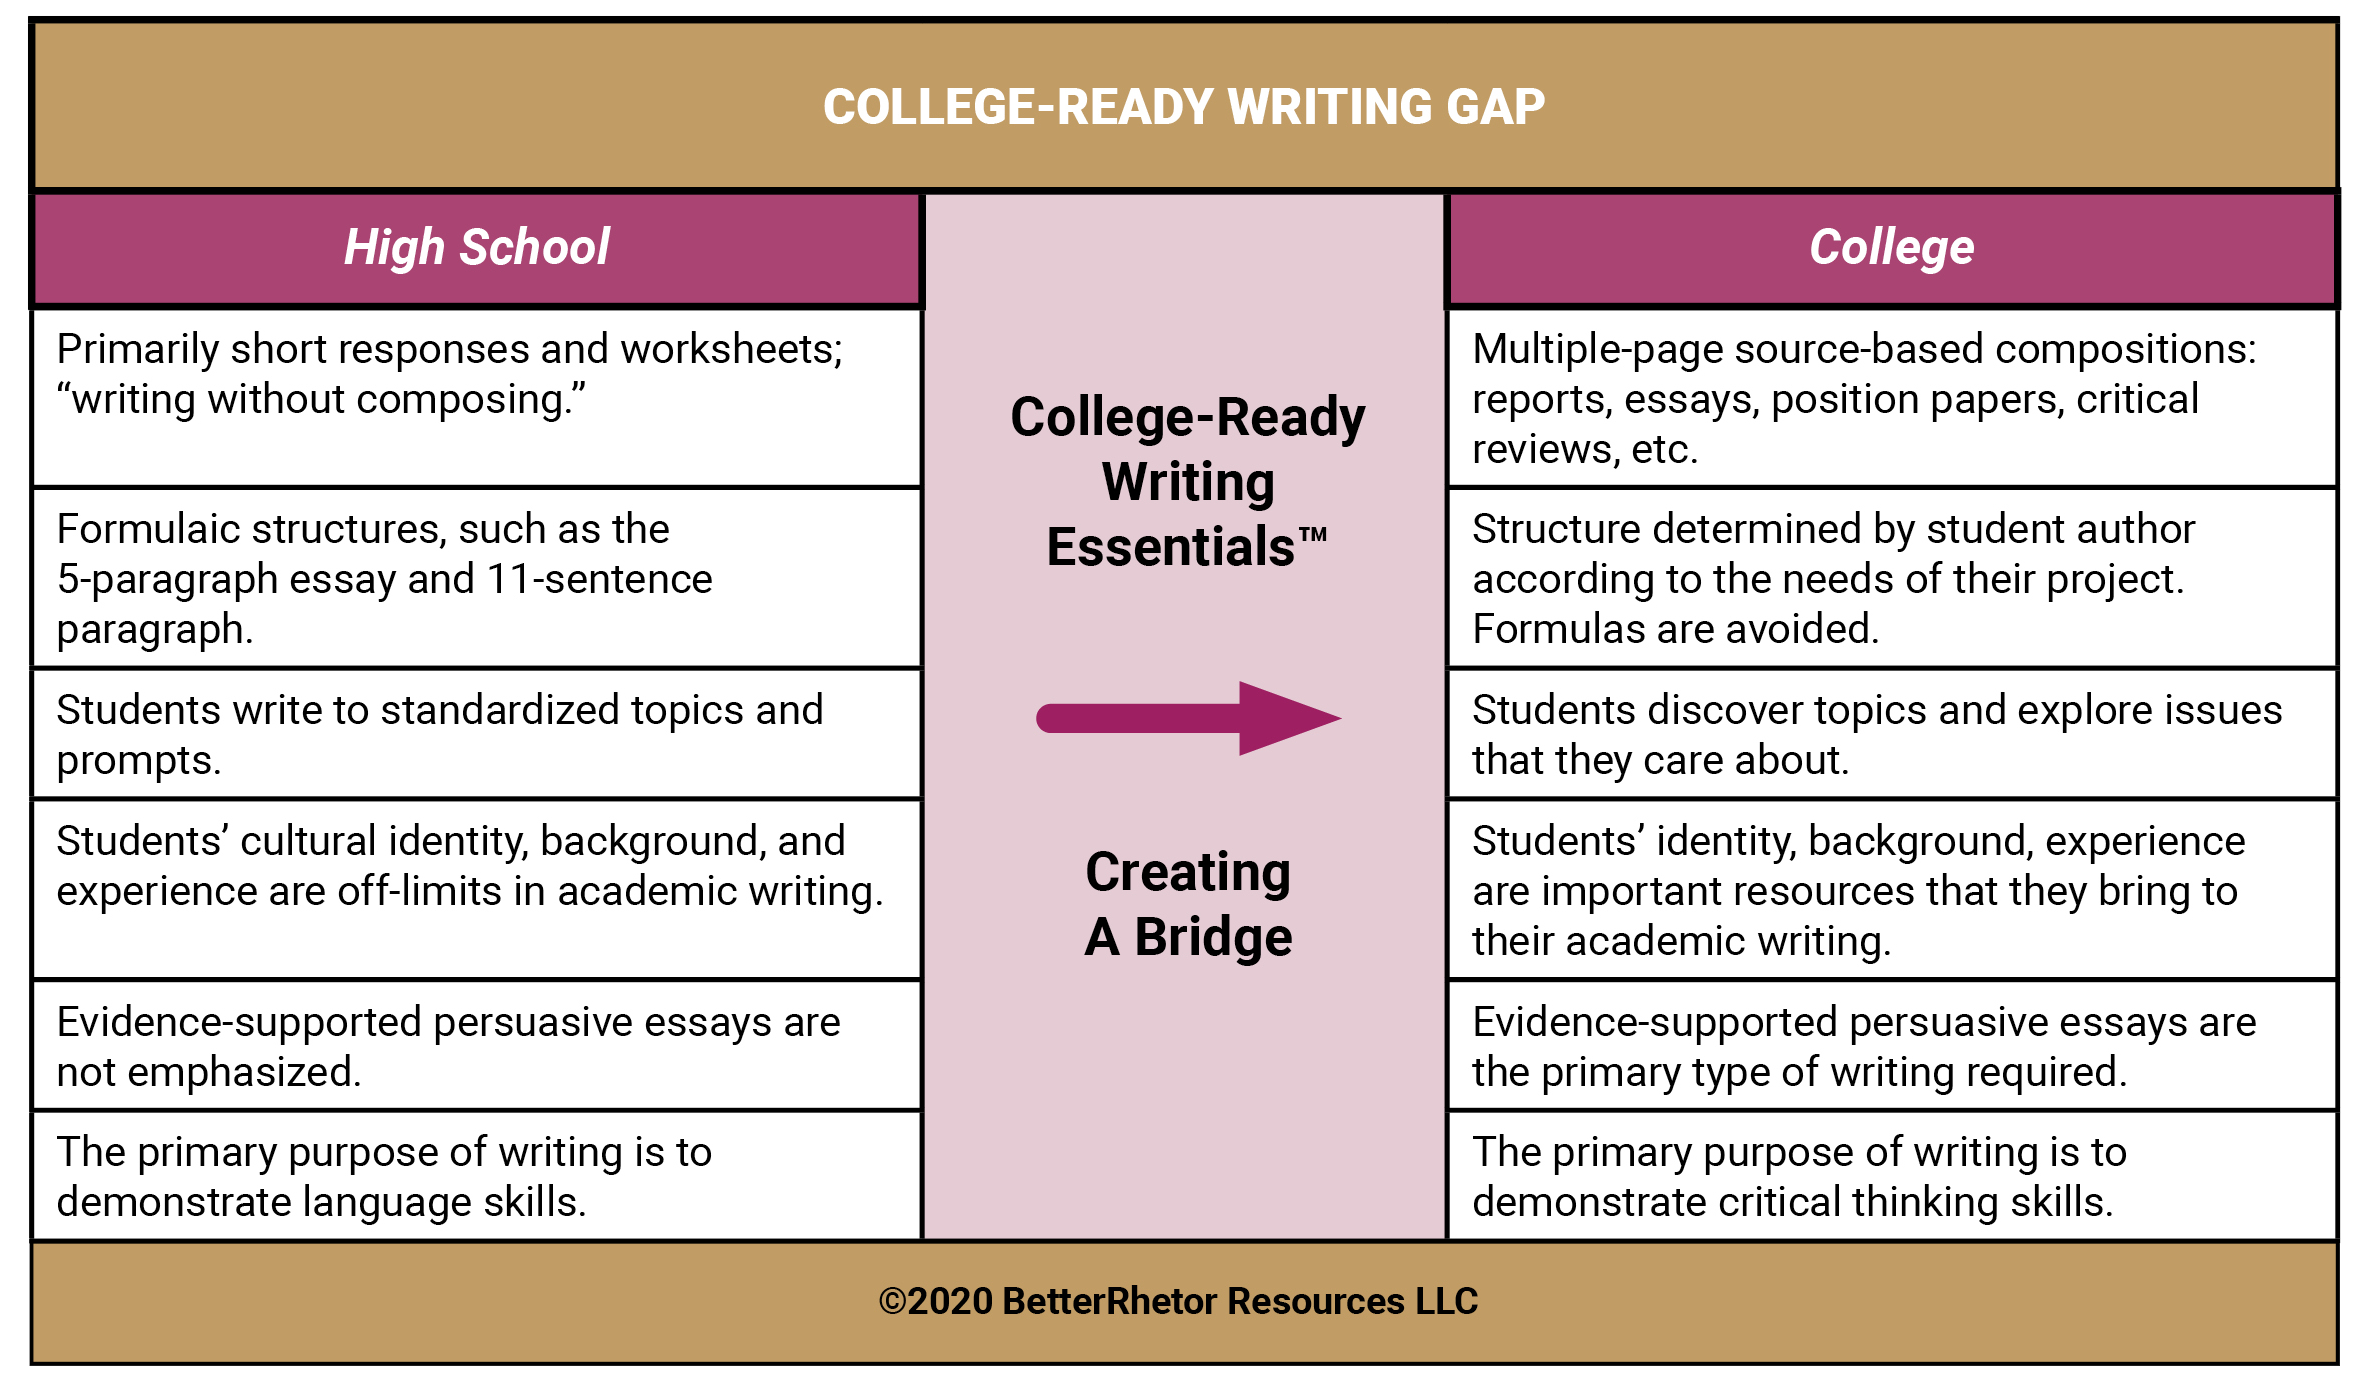 Chart of Differences Between High School and College Writing